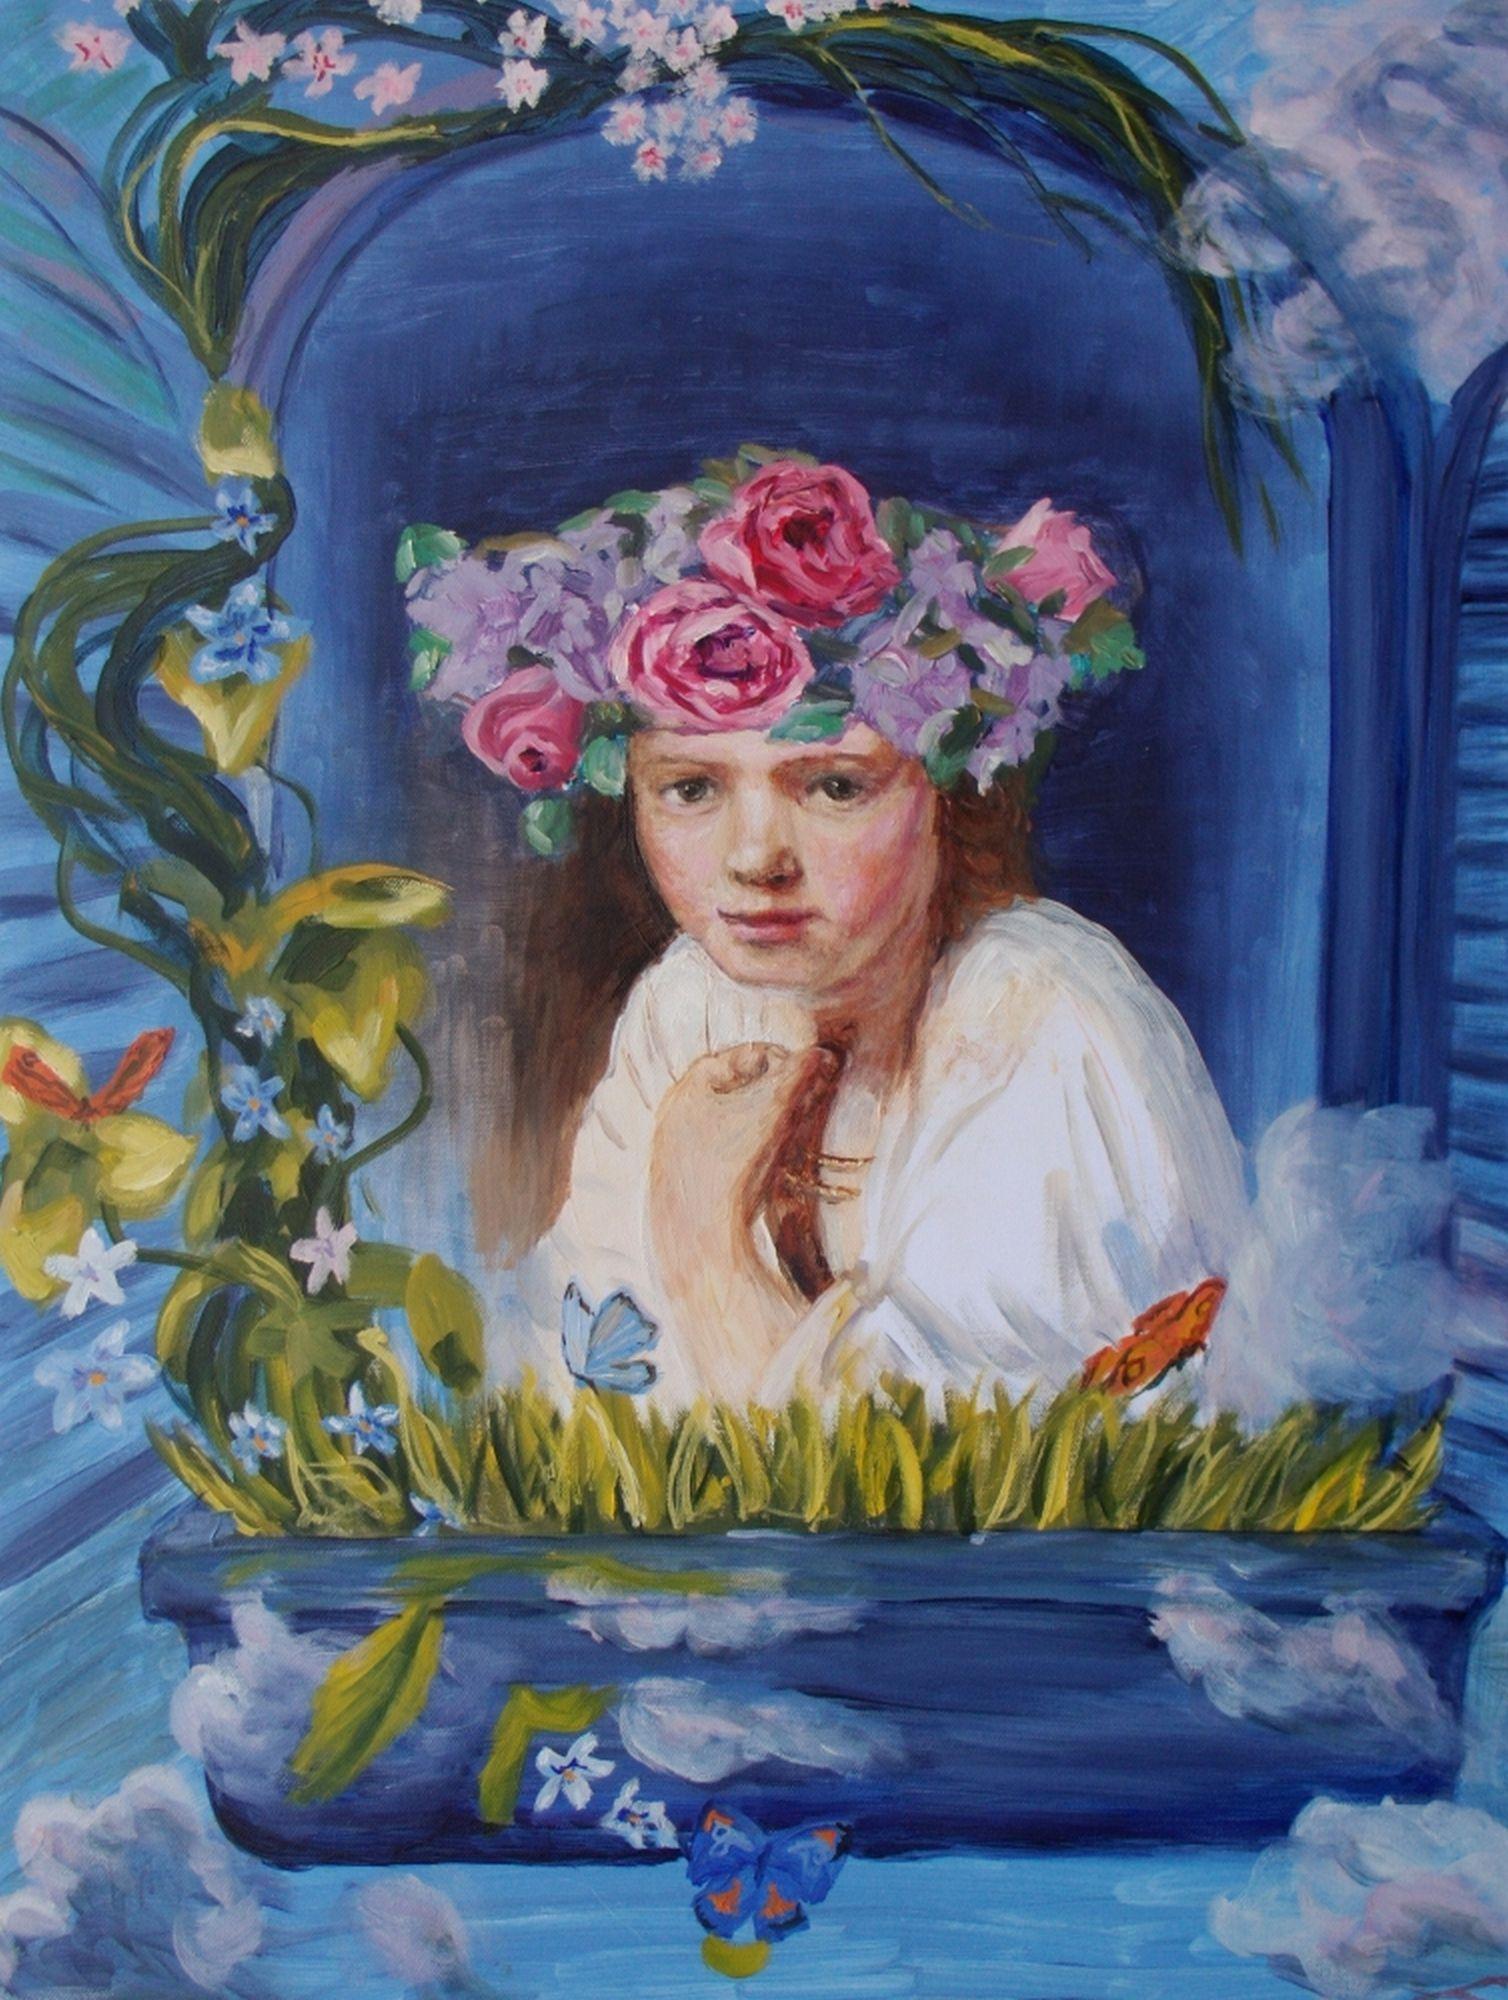 Girl in te window, inspired by Rembrandt, painted in spring froral style. :: Painting :: Impressionist :: This piece comes with an official certificate of authenticity signed by the artist :: Ready to Hang: Yes :: Signed: Yes :: Signature Location: